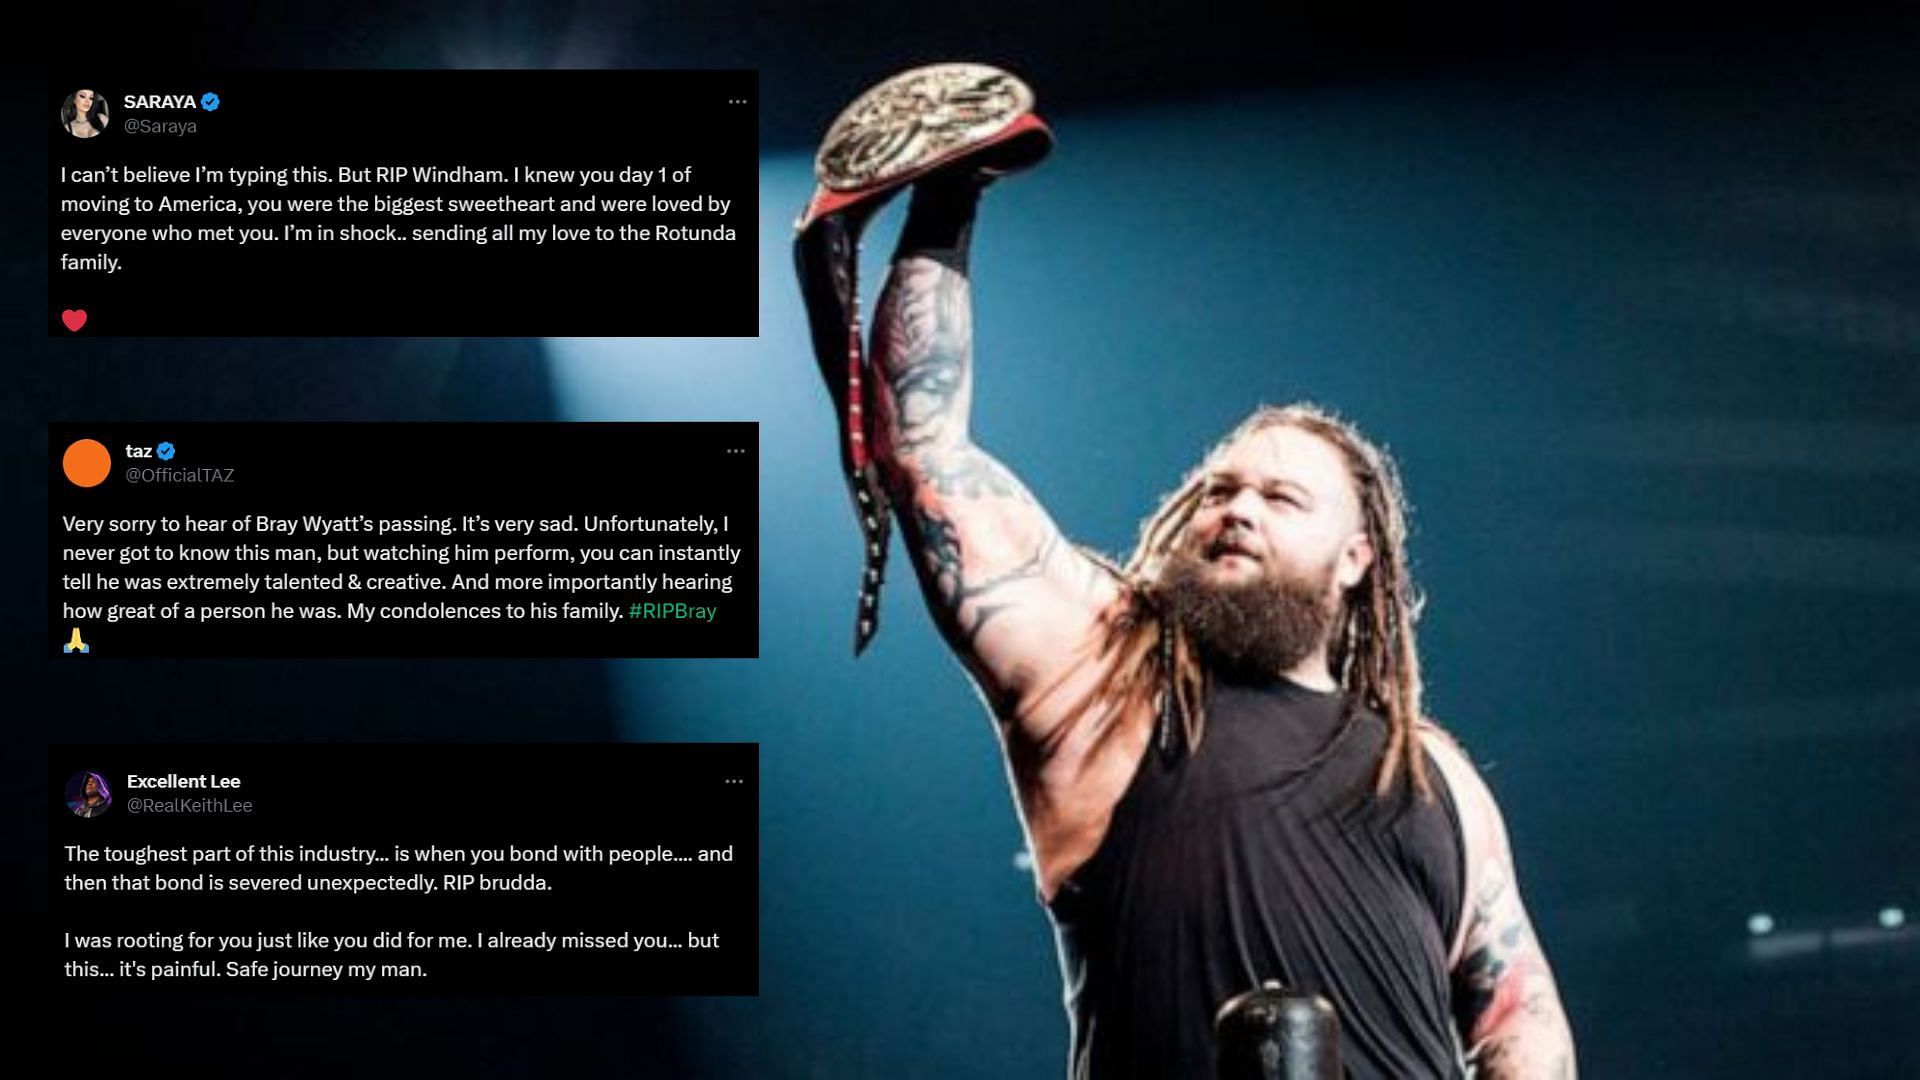 Bray Wyatt was a former WWE Champion, who passed earlier today